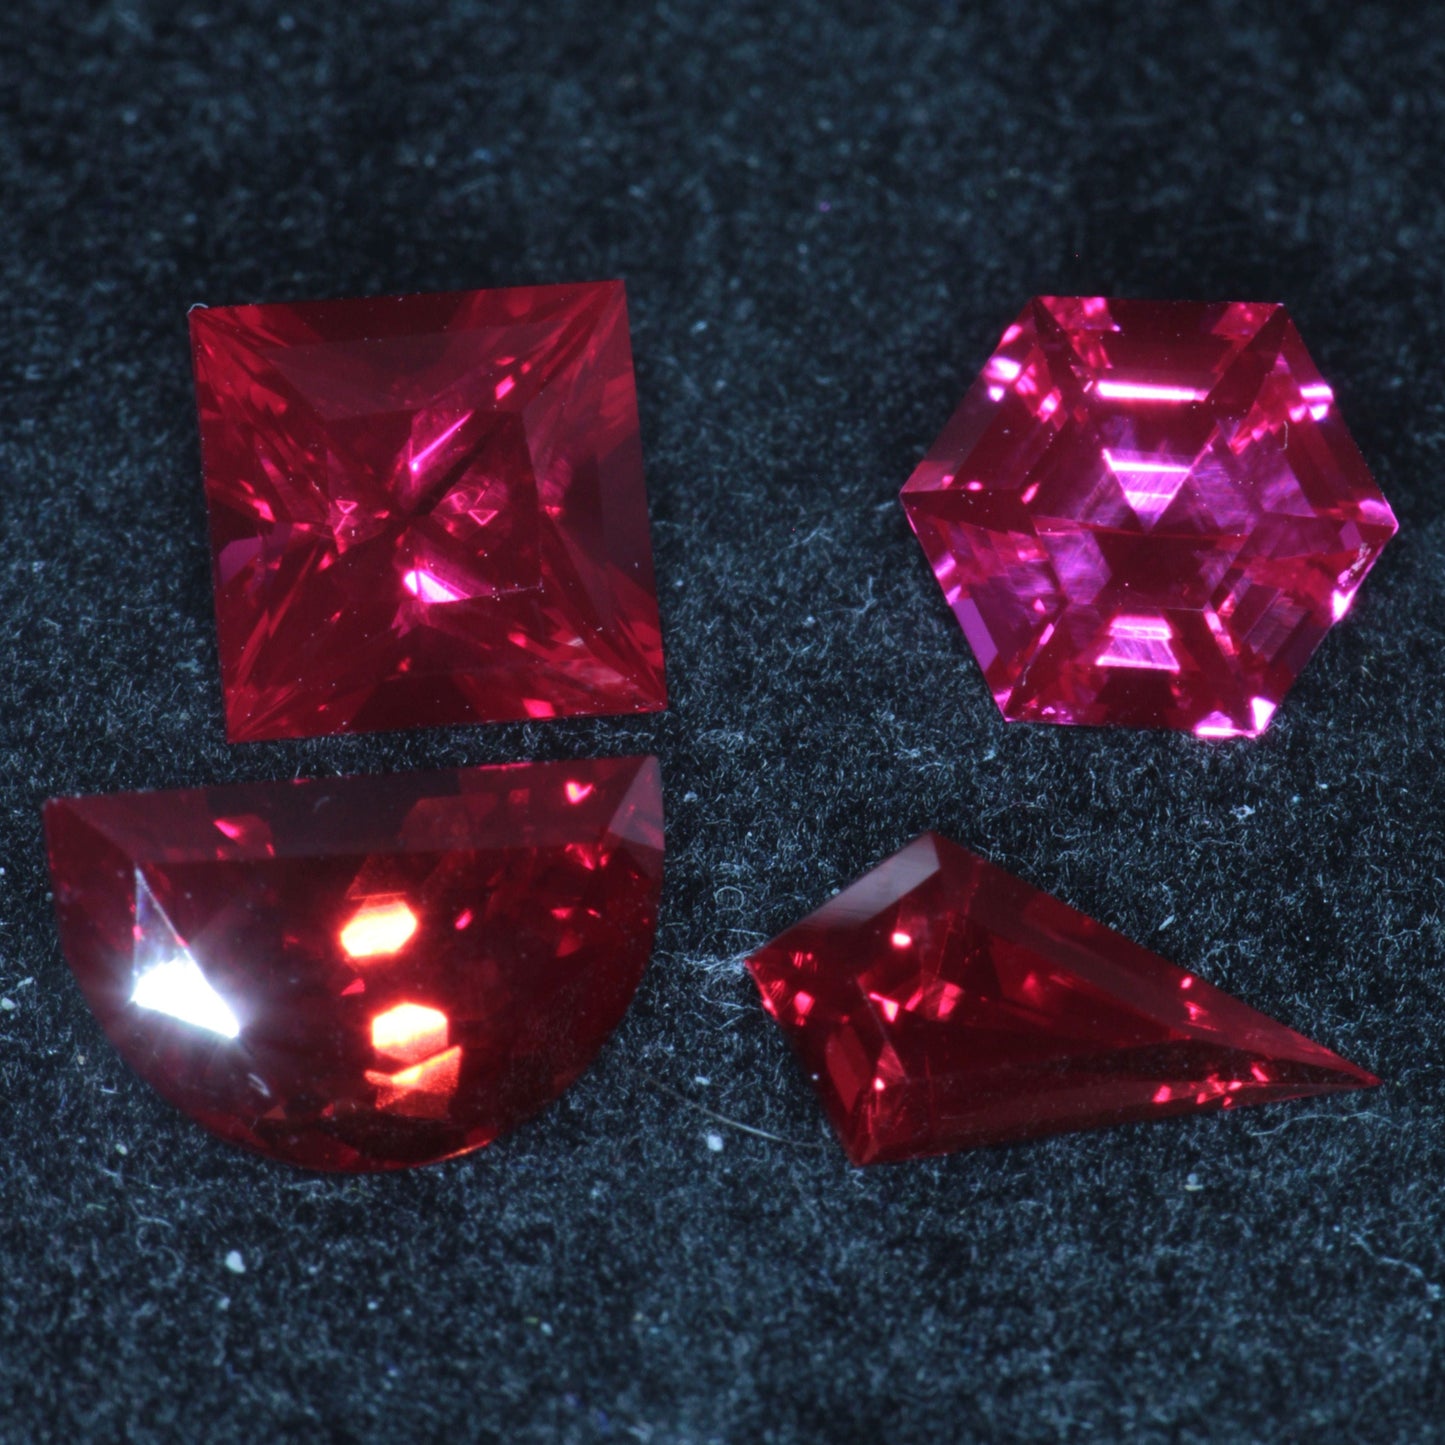 Blood Red Ruby Loose Faceted Stones Czochralski Pulled Crystal